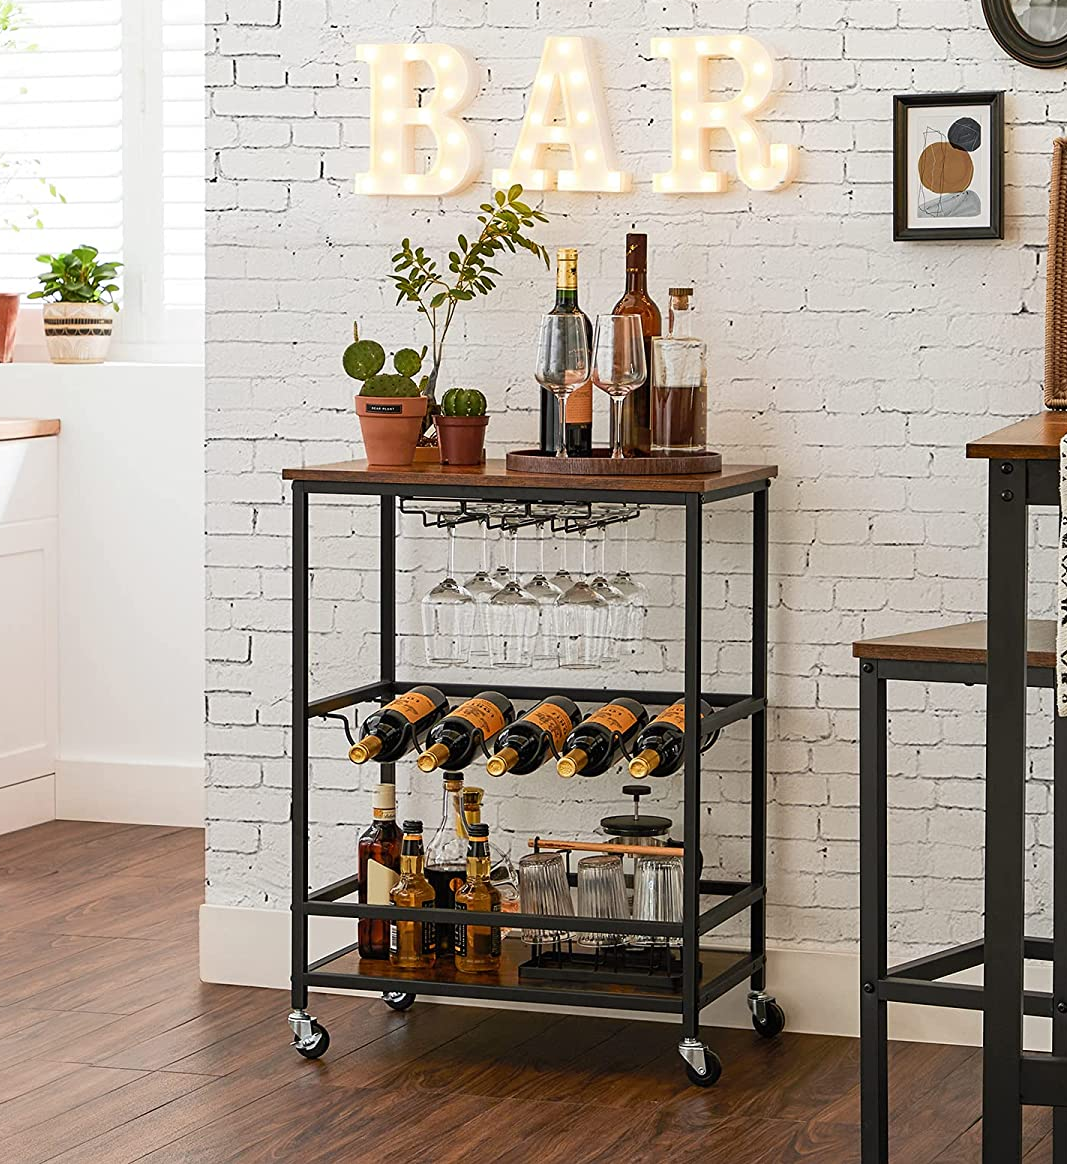 the industrial style bar cart fully stocked with bottles, glasses, and plants